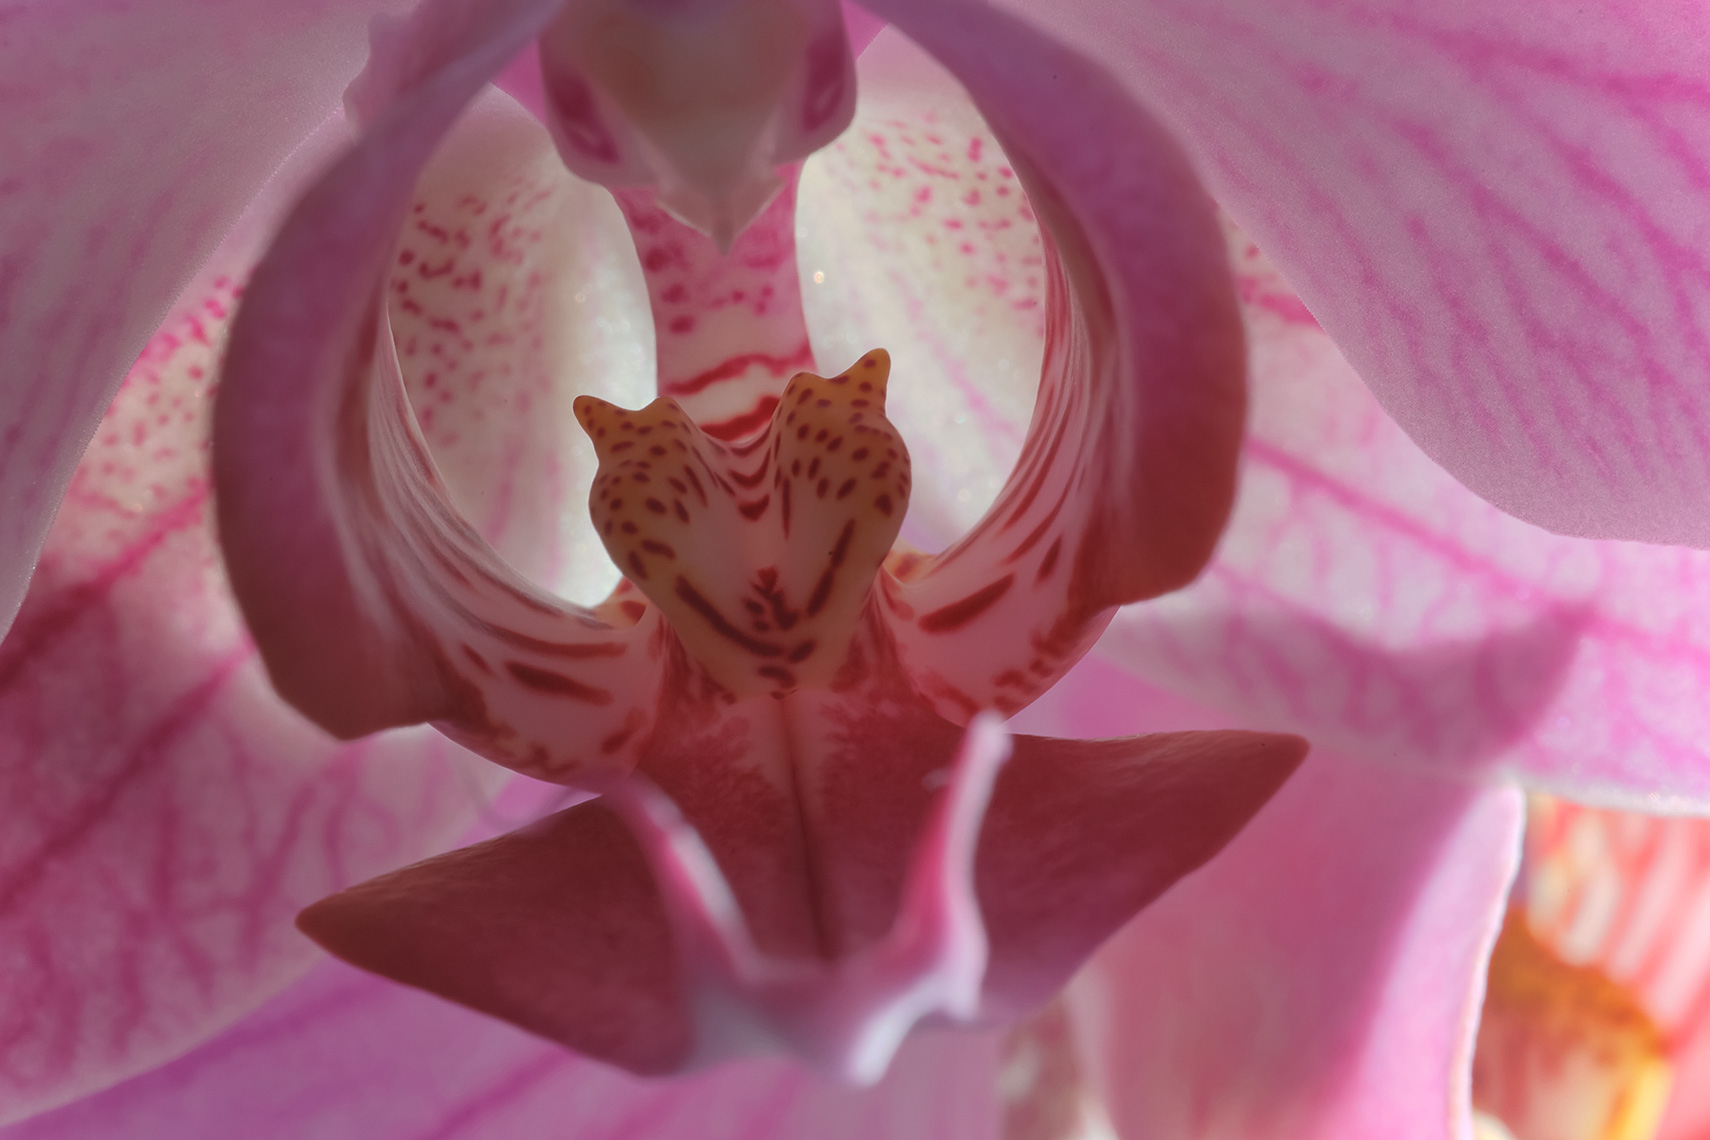 Macro view of the inside of an orchid with pink flowers and delicate stamen and pistol